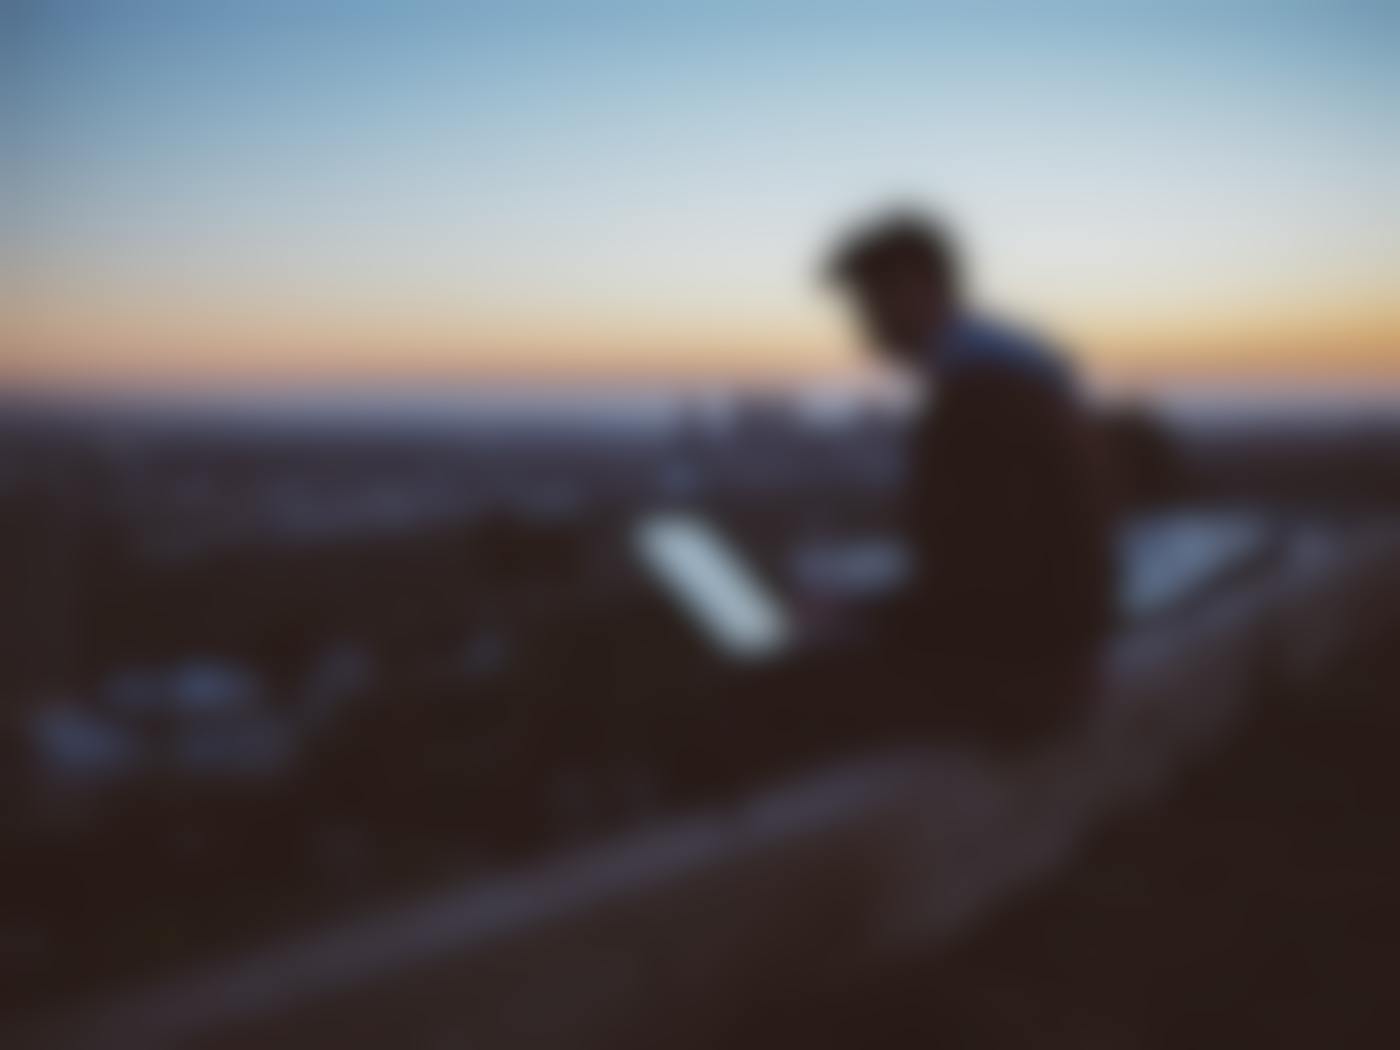 A guy sitting on the edge of a wall with a cityscape behind him working on a laptop.